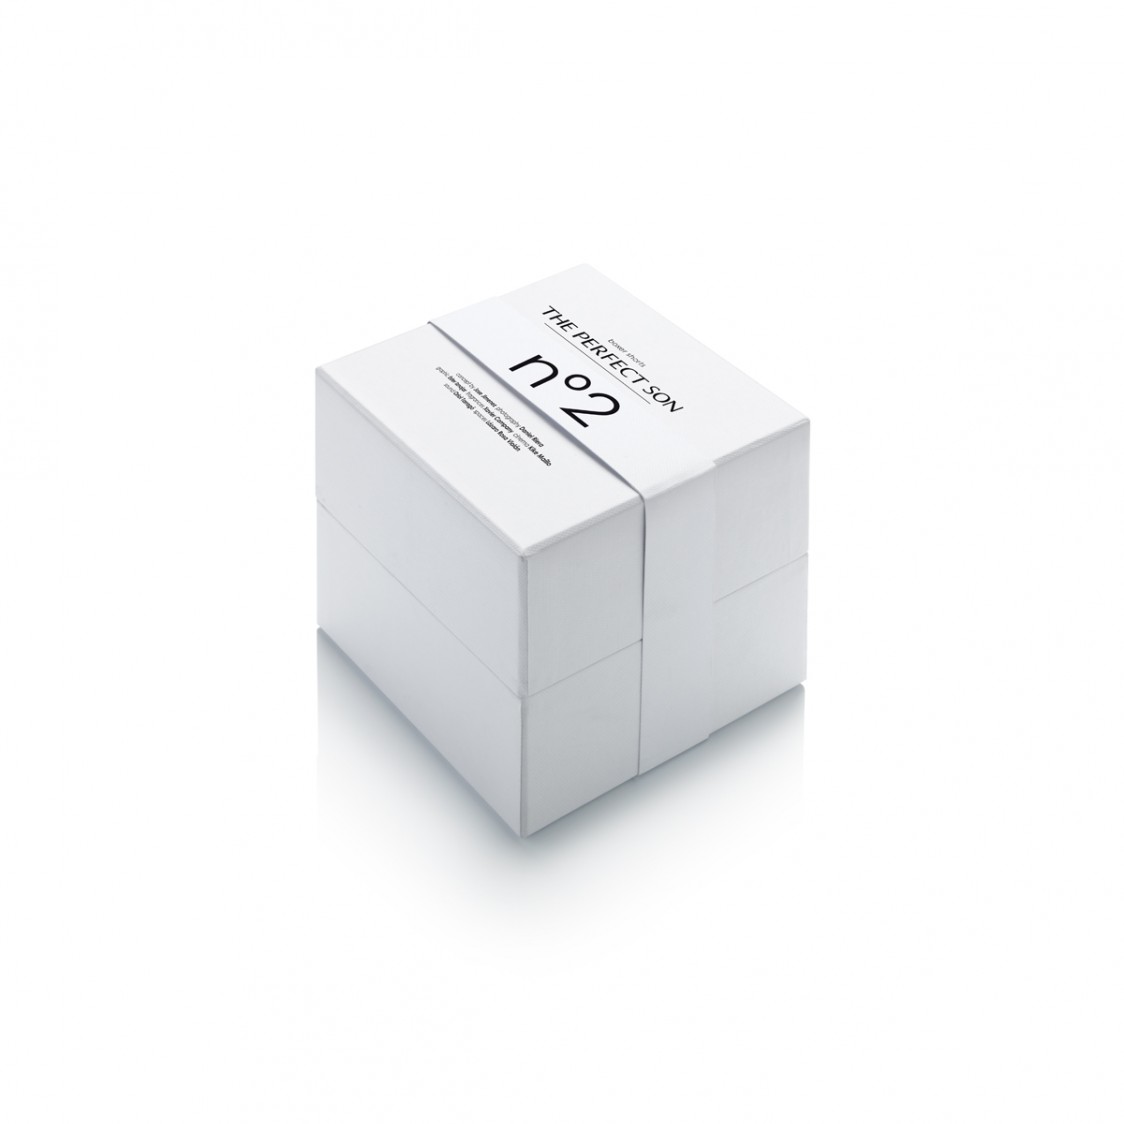 Nº2 closed cube box with underwear for men